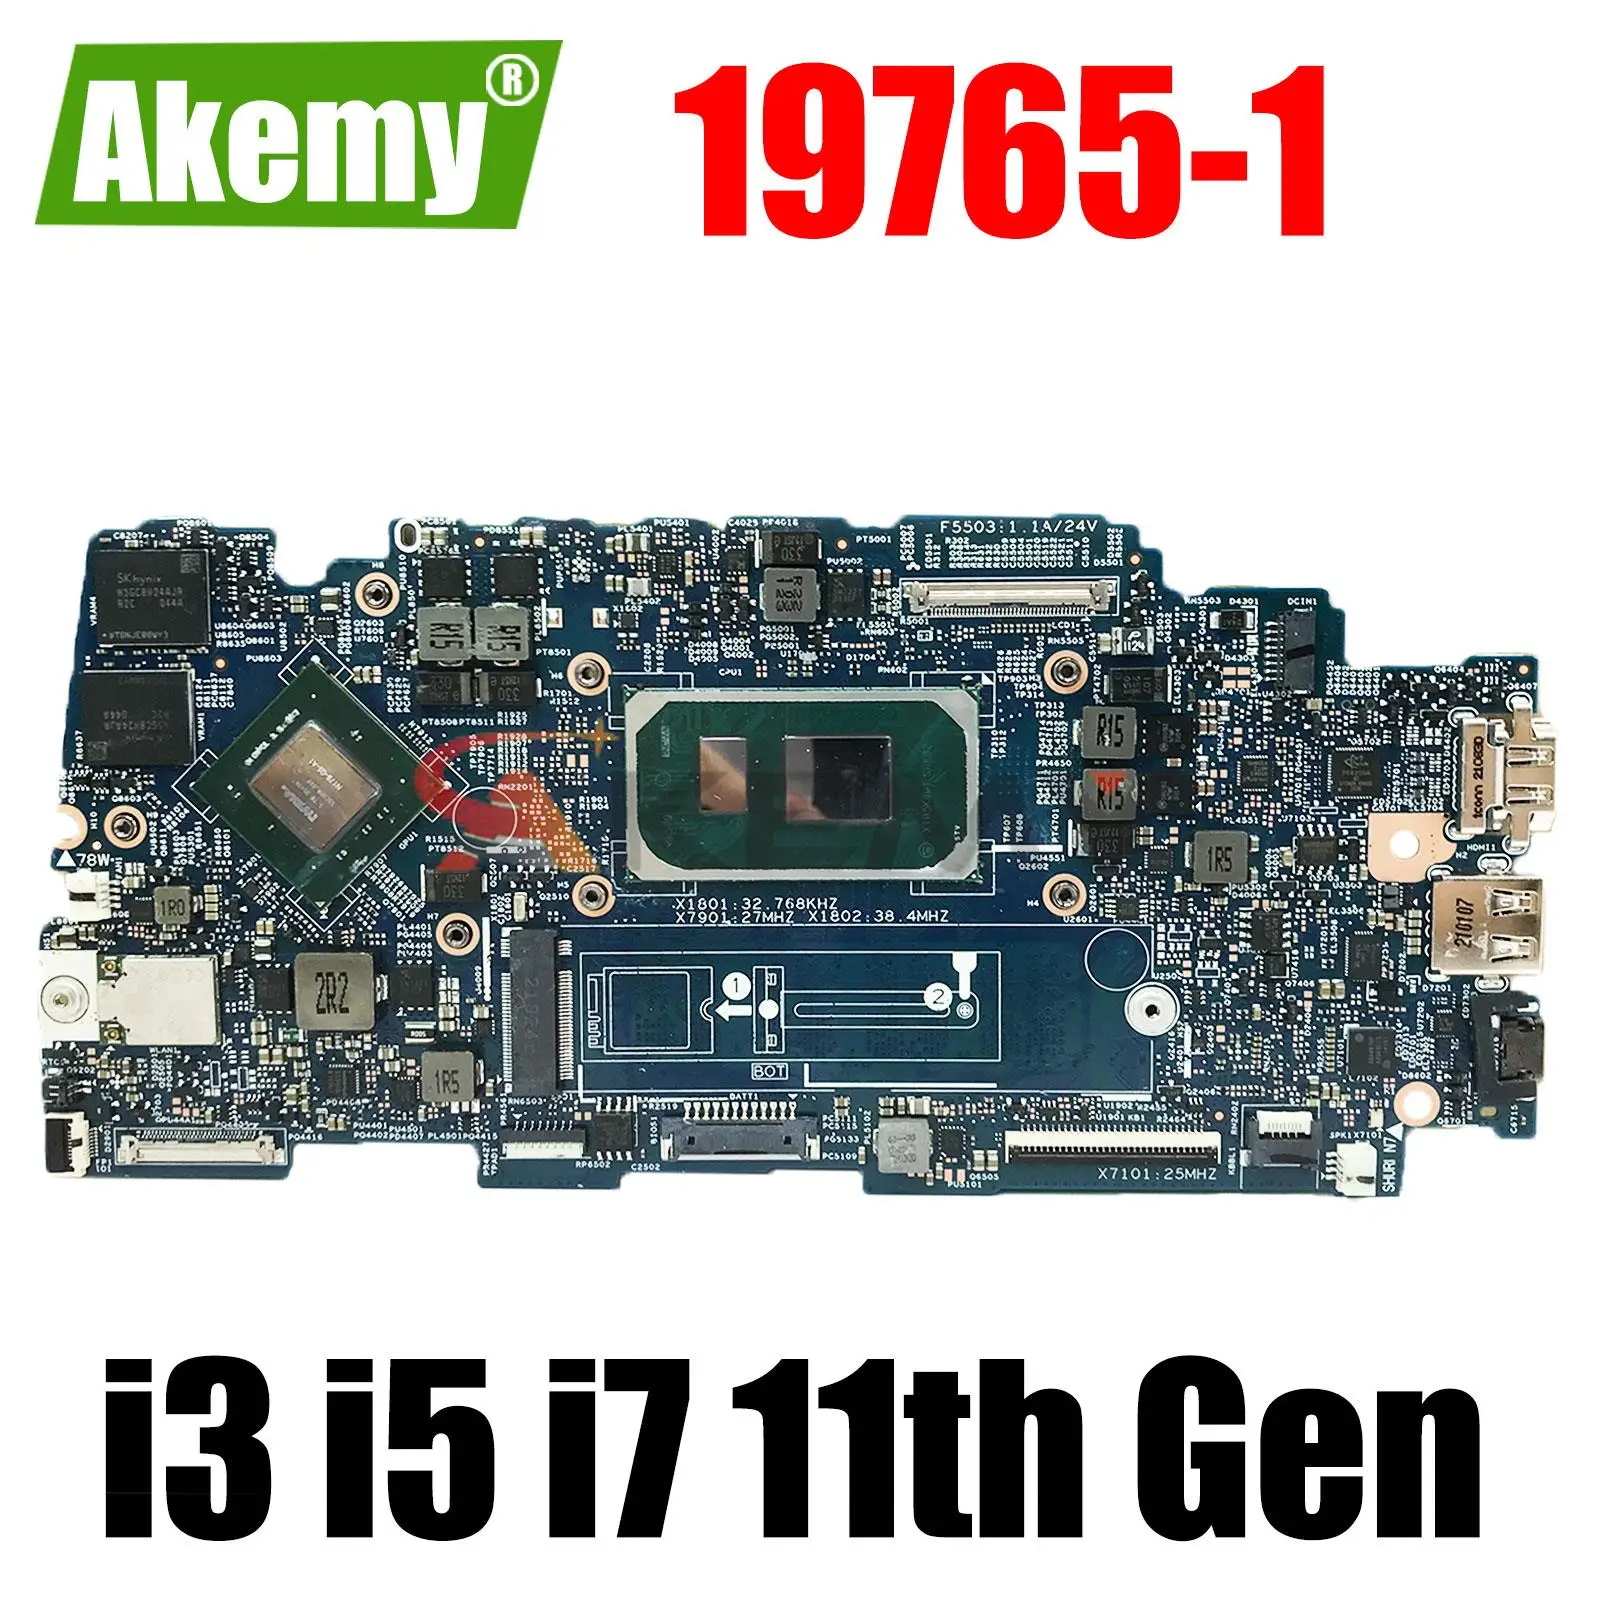 

19765-1 For dell Inspiron 7400 7300 5301 Laptop Motherboard With i3 i5 i7 11th Gen CPU N17S-G5-A1 GPU 100% Fully tested